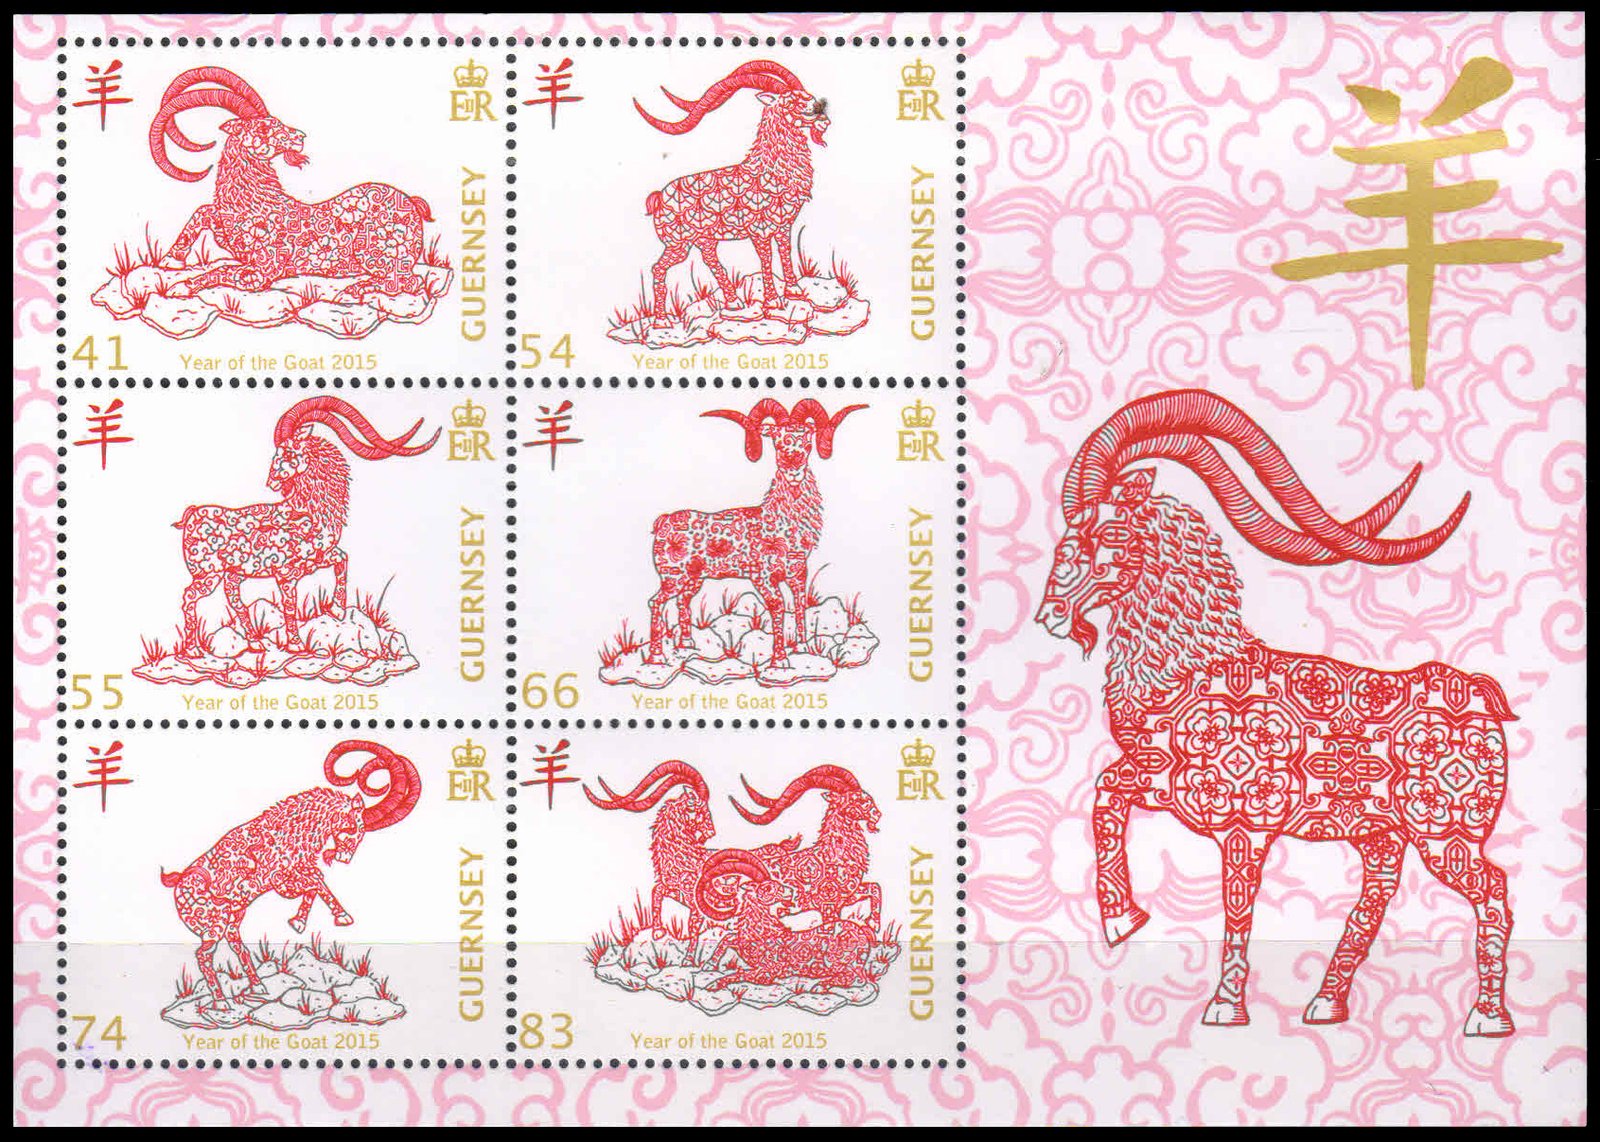 GUERNSEY 2015-Chinese New Year of the Goat, Miniature Sheet of 6, MNH